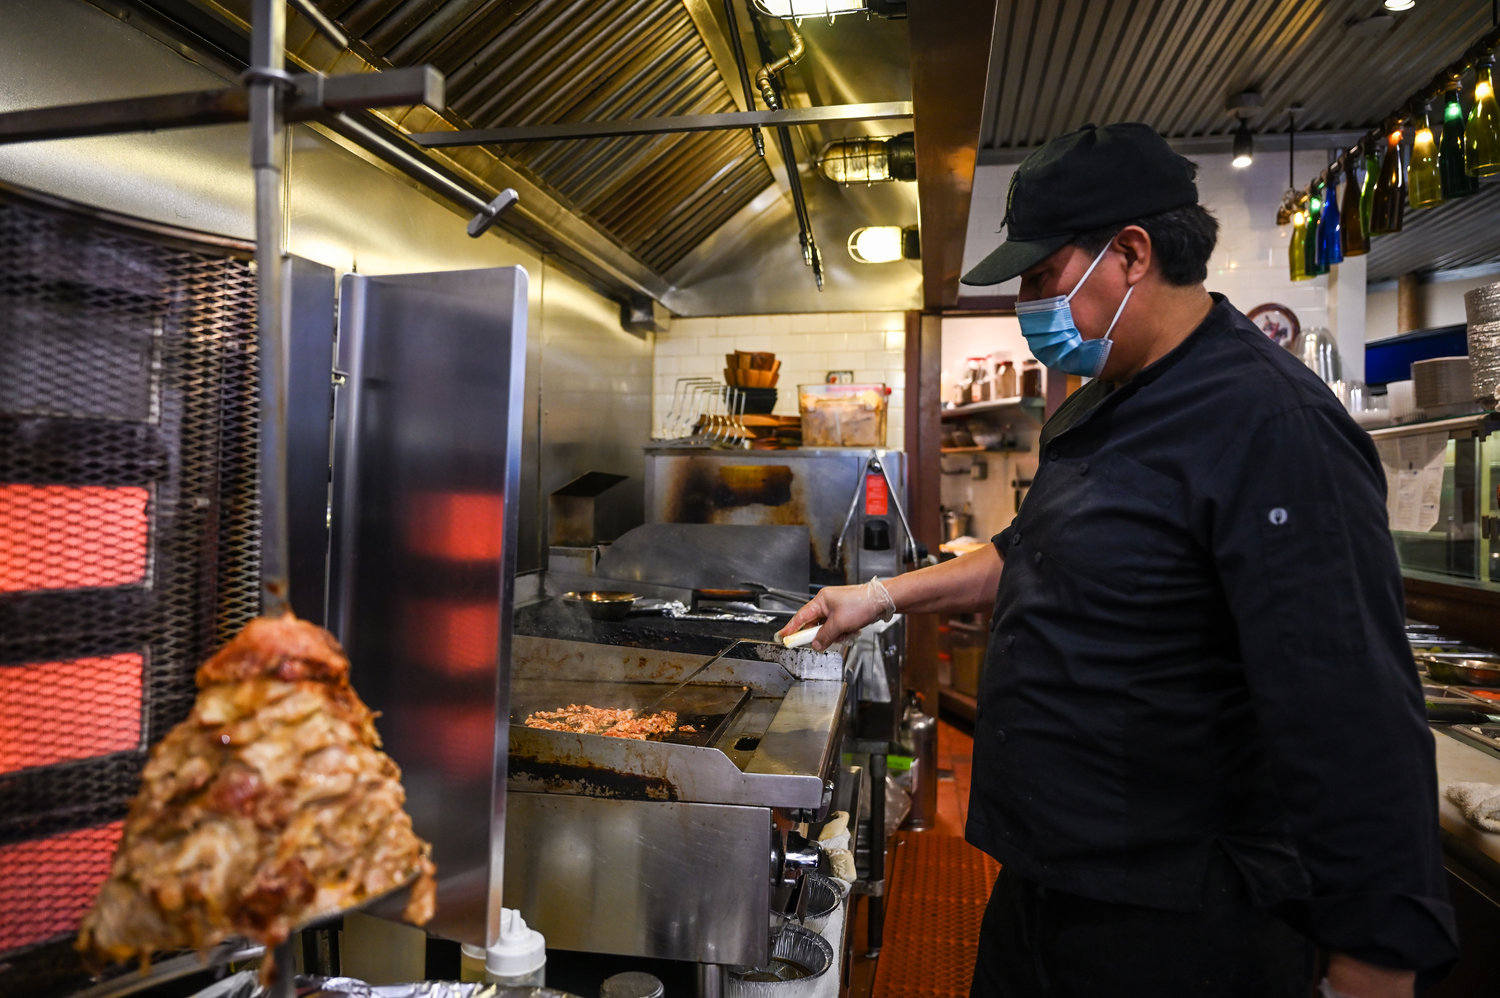 A cook at Taste & Sabor prepares meat for a salad bowl at the West 231st Street eatery. While the eatery is known for its Latin and Greek fare, some neighbors in need have discovered that when Taste & Sabor receives more food than it needs, it’s willing to share.